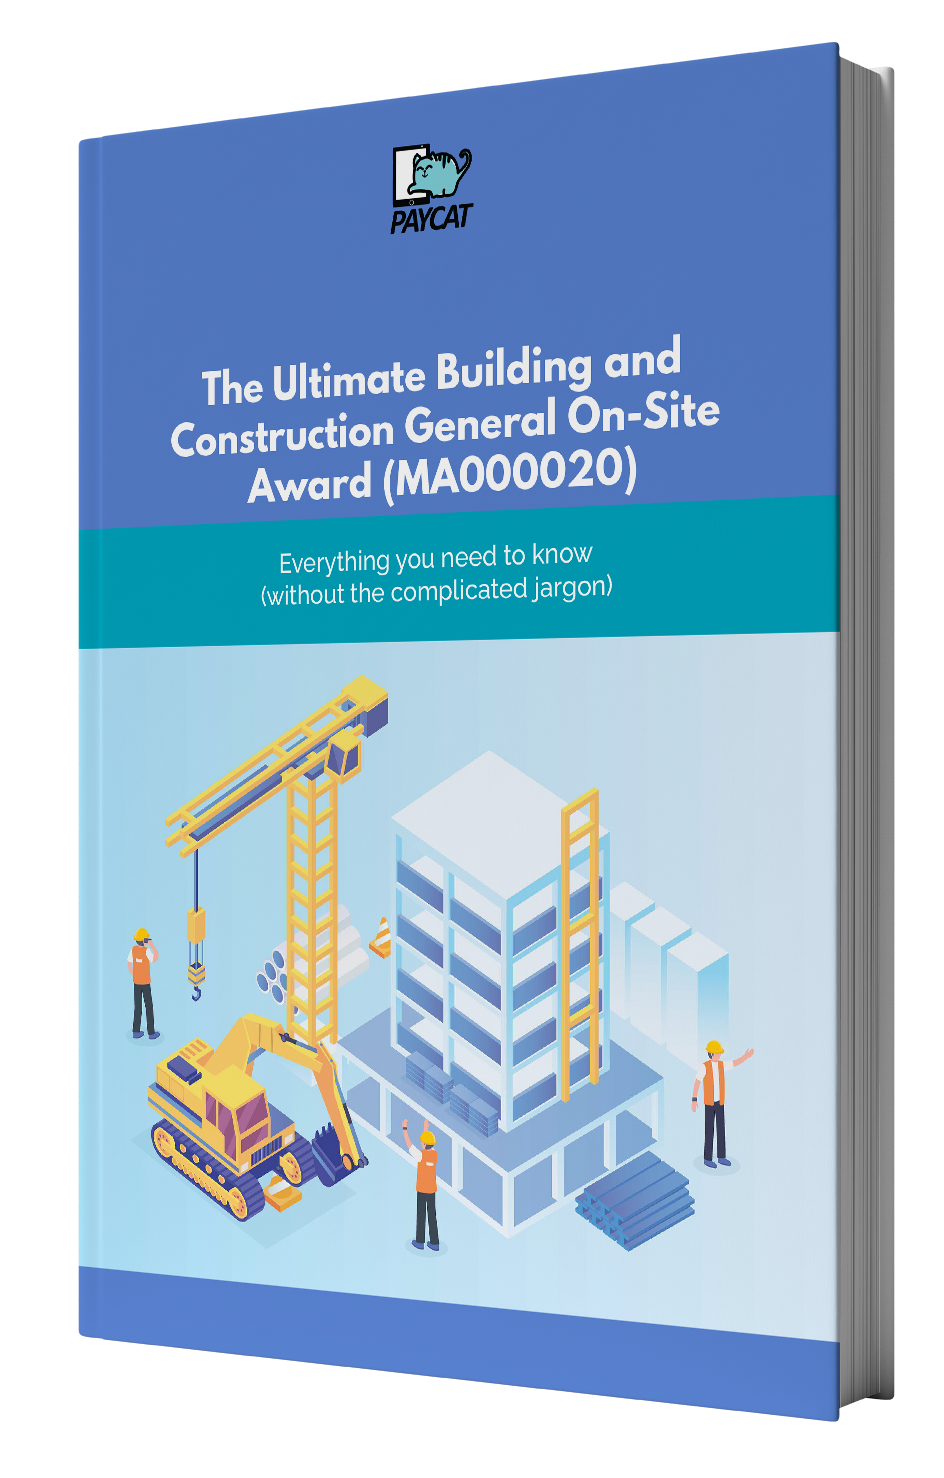 The Jargon Free Building And Construction Award Guide Ma000020